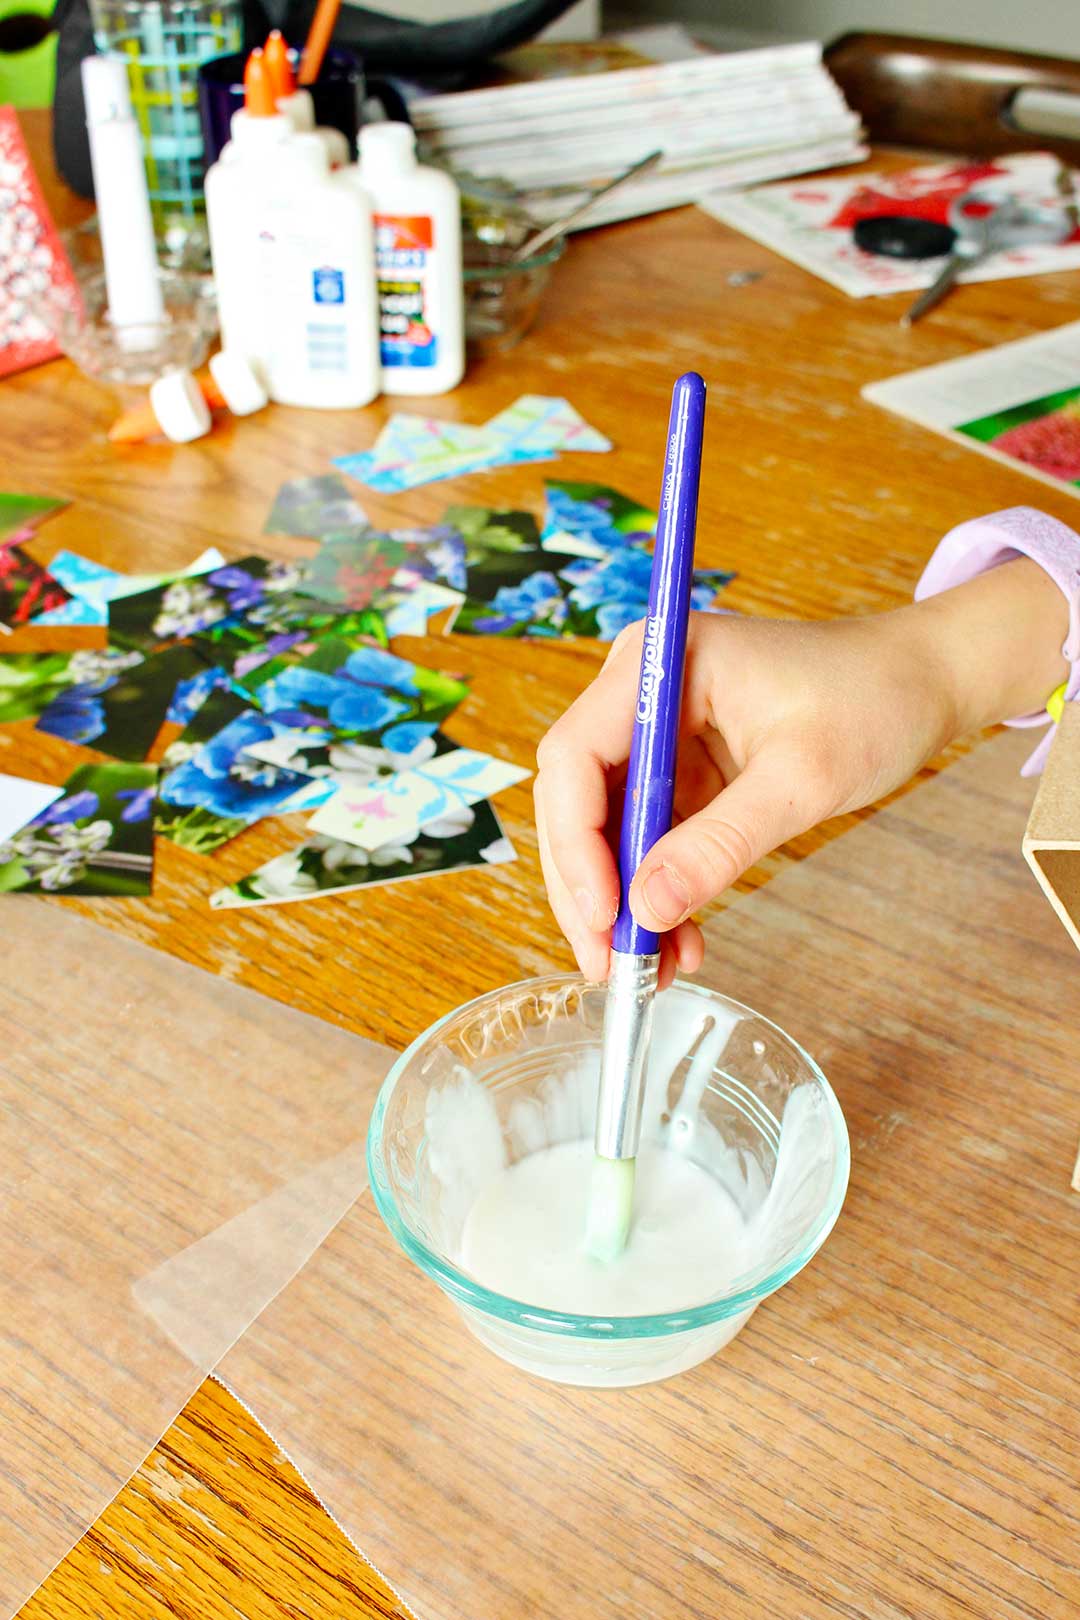 Child dipping paintbrush into a glass bowl full of Mod Podge with other decoupage supplies nearby at the kitchen table.